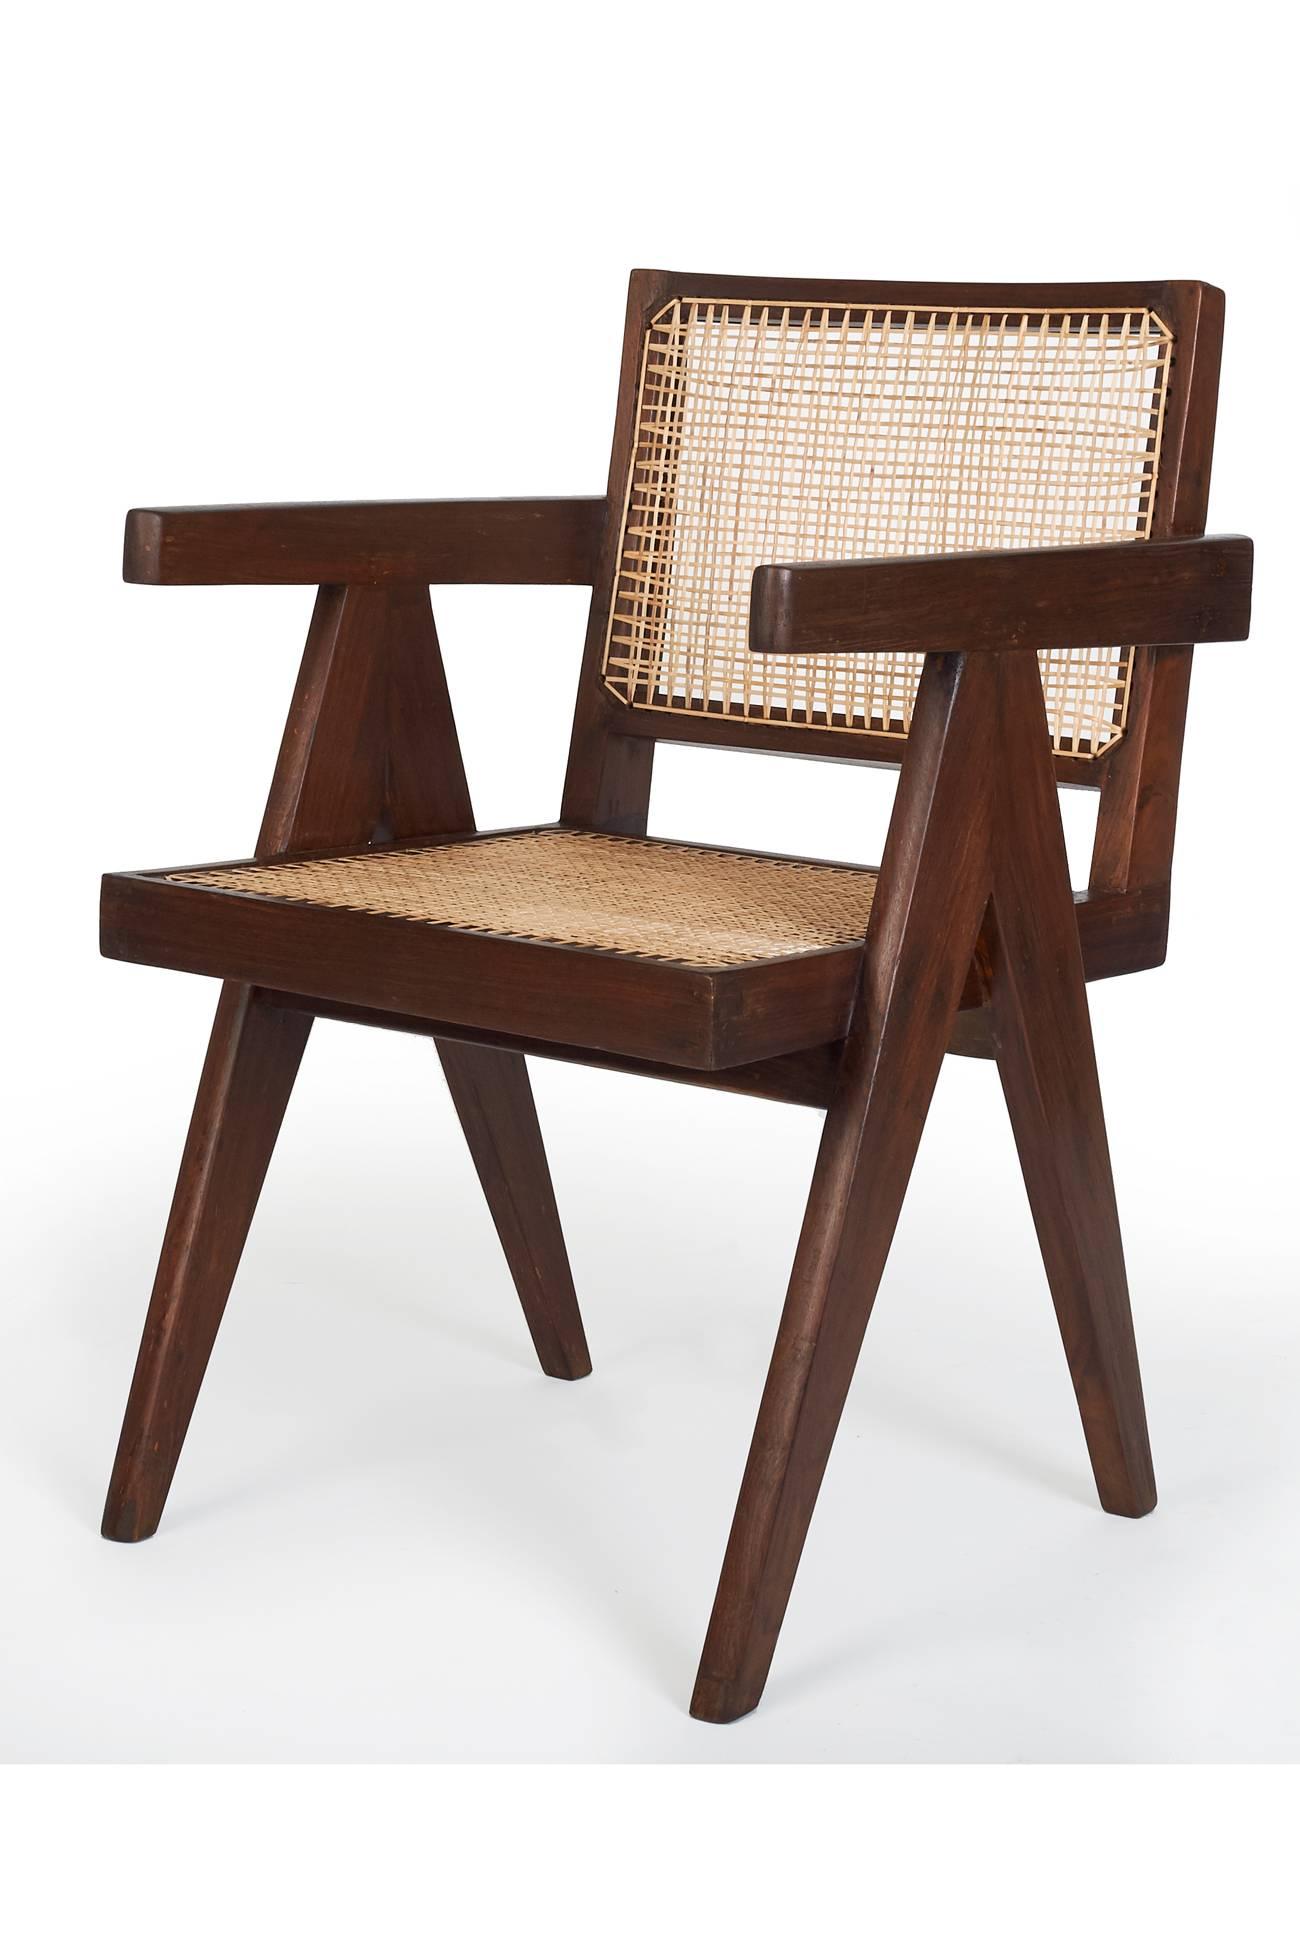 Pierre Jeanneret (1896–1967)

A stunning modernist office or armchair with compass legs, gently curved back, and geometric arms by Pierre Jeanneret, for the Chandigarh Administrative Buildings in India designed by his cousin and frequent